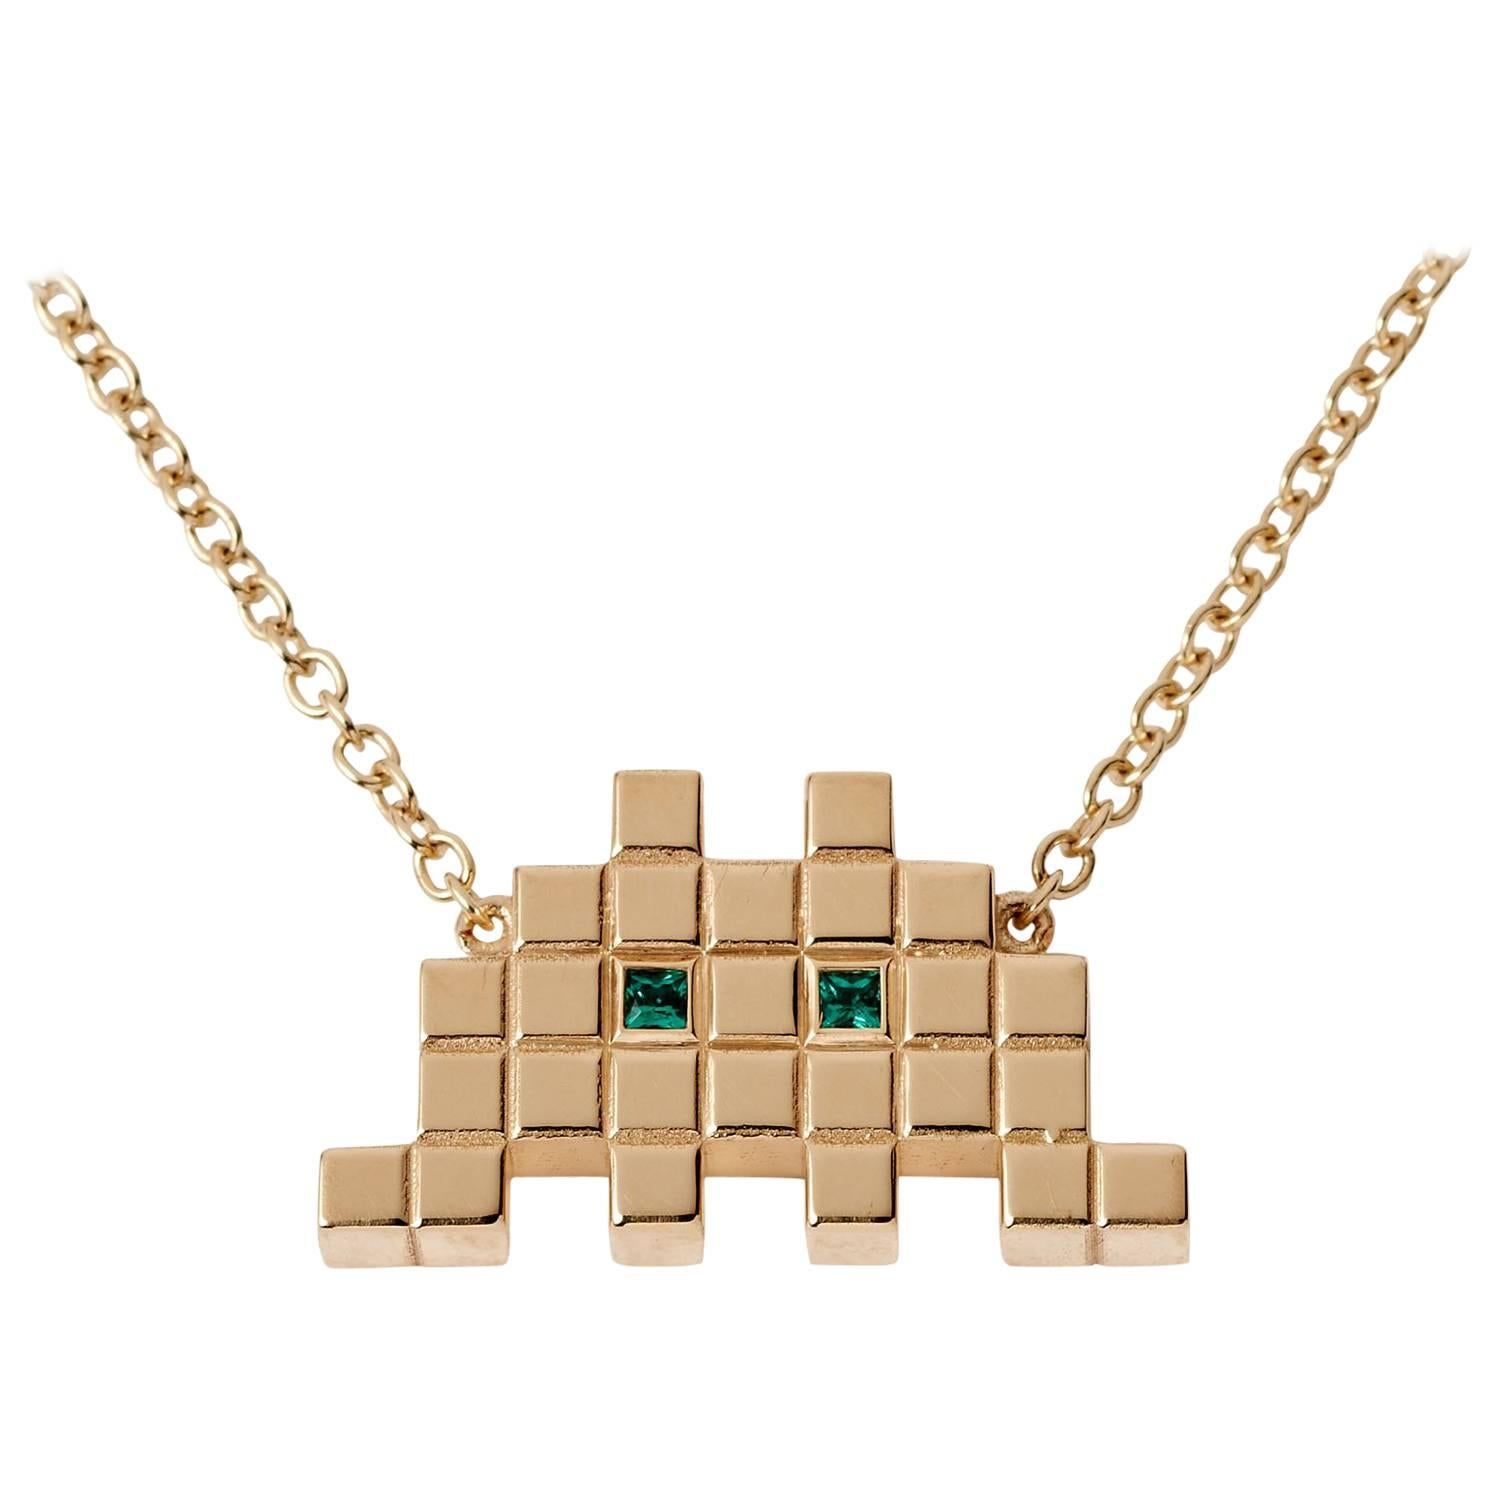 Francesca Grima Yellow Gold and Emerald Invader I Necklace